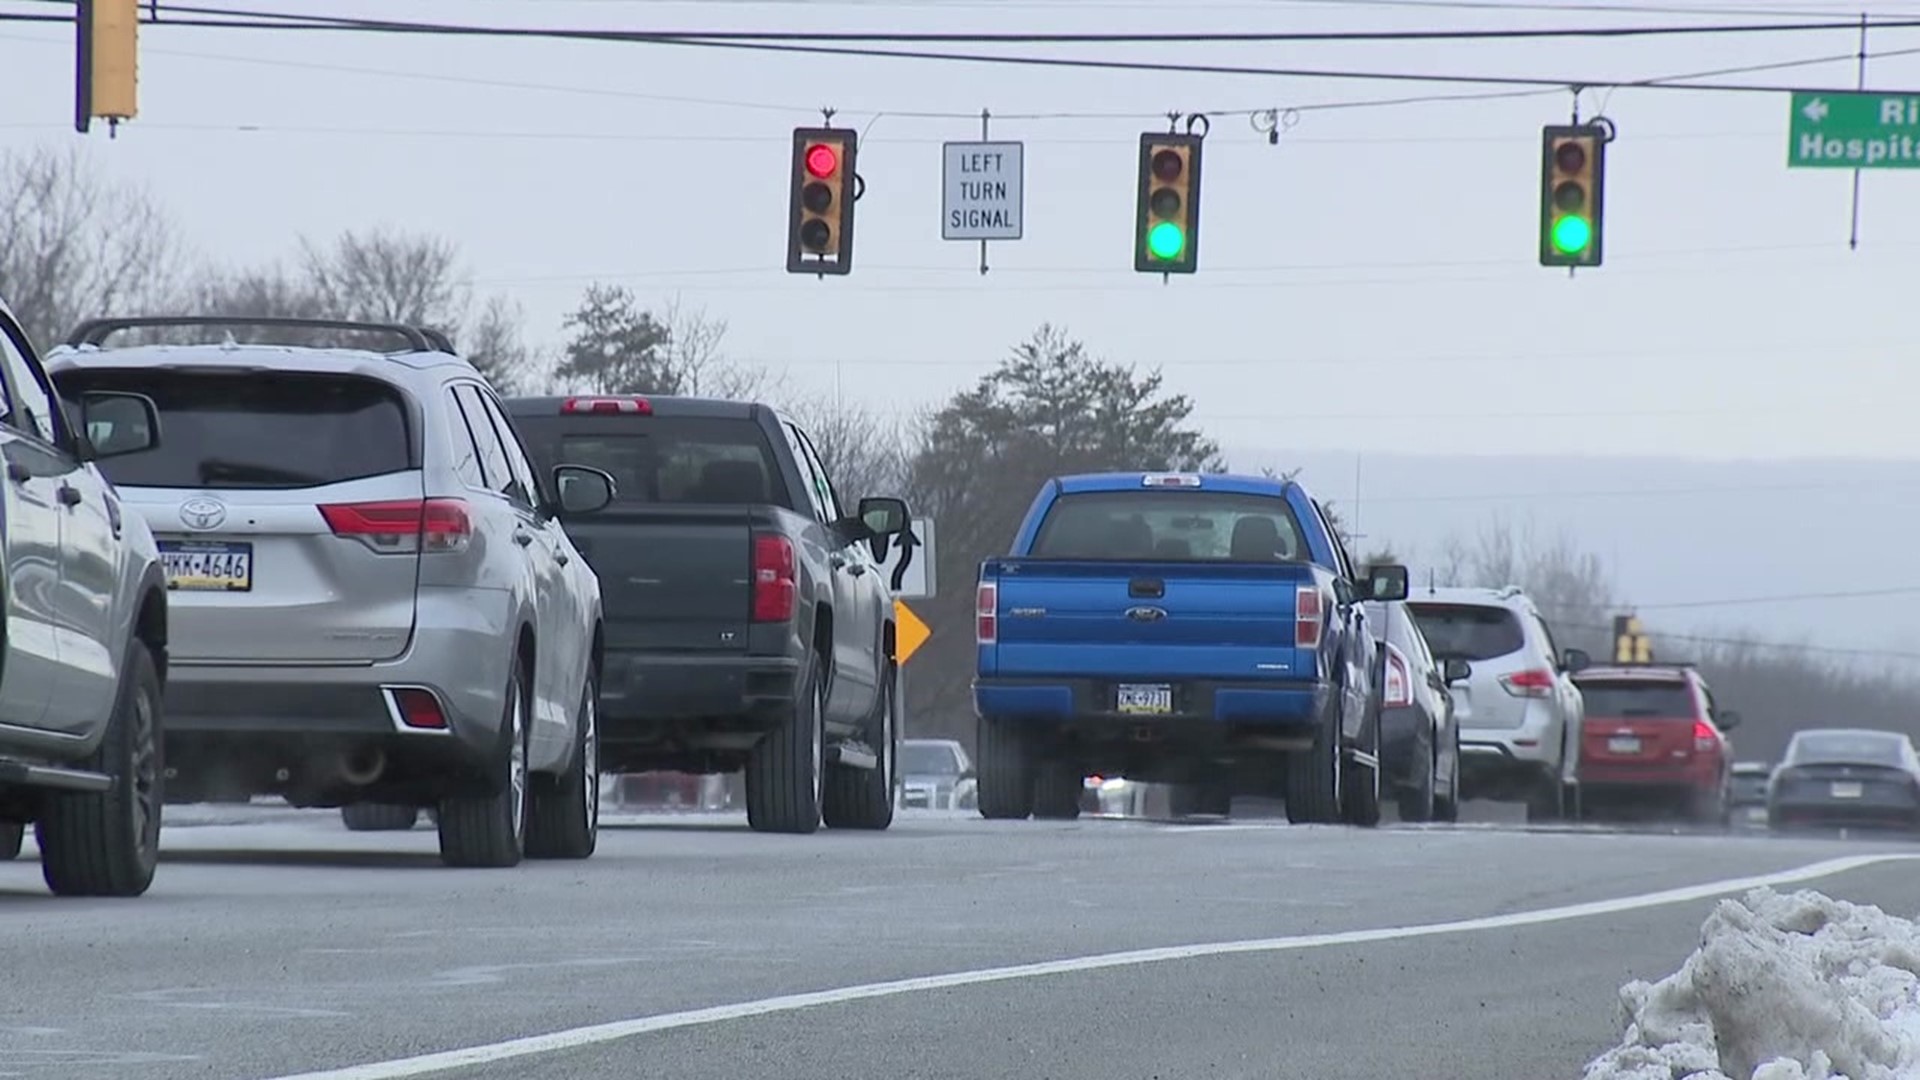 Despite the snow, ice, and cold weather, people are still driving places for Christmas.